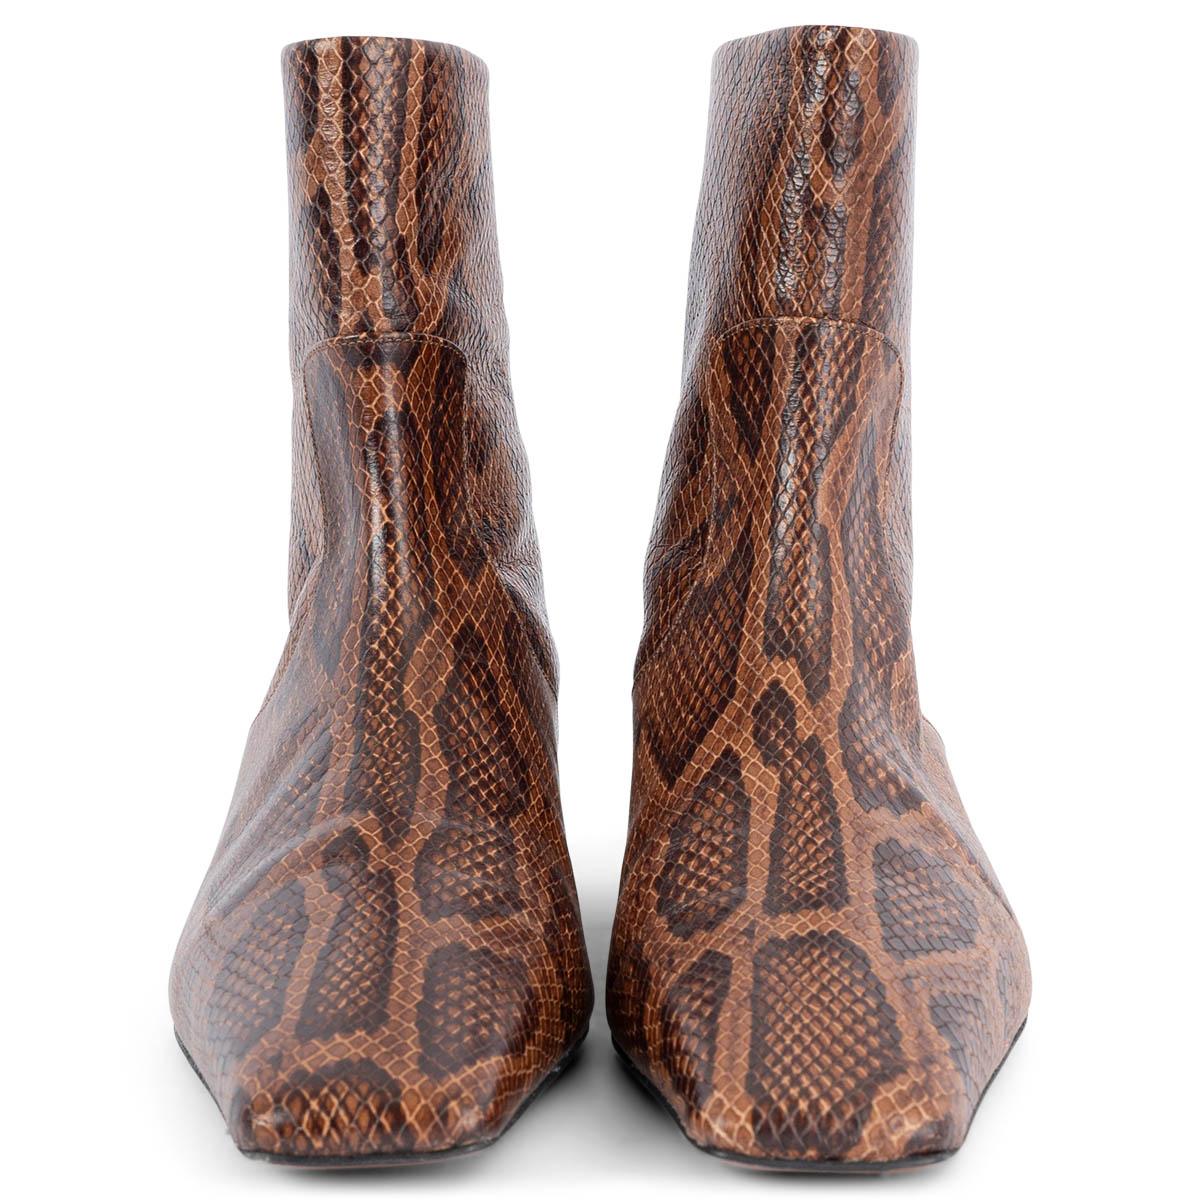 100% authentic Nanushka Tamal snake effect ankle boots in brown and espresso brown leather. Open with a back zip. Brand new. 

Measurements
Imprinted Size	38
Shoe Size	38
Inside Sole	25cm (9.8in)
Width	7.5cm (2.9in)
Heel	2cm (0.8in)
Shaft	18cm